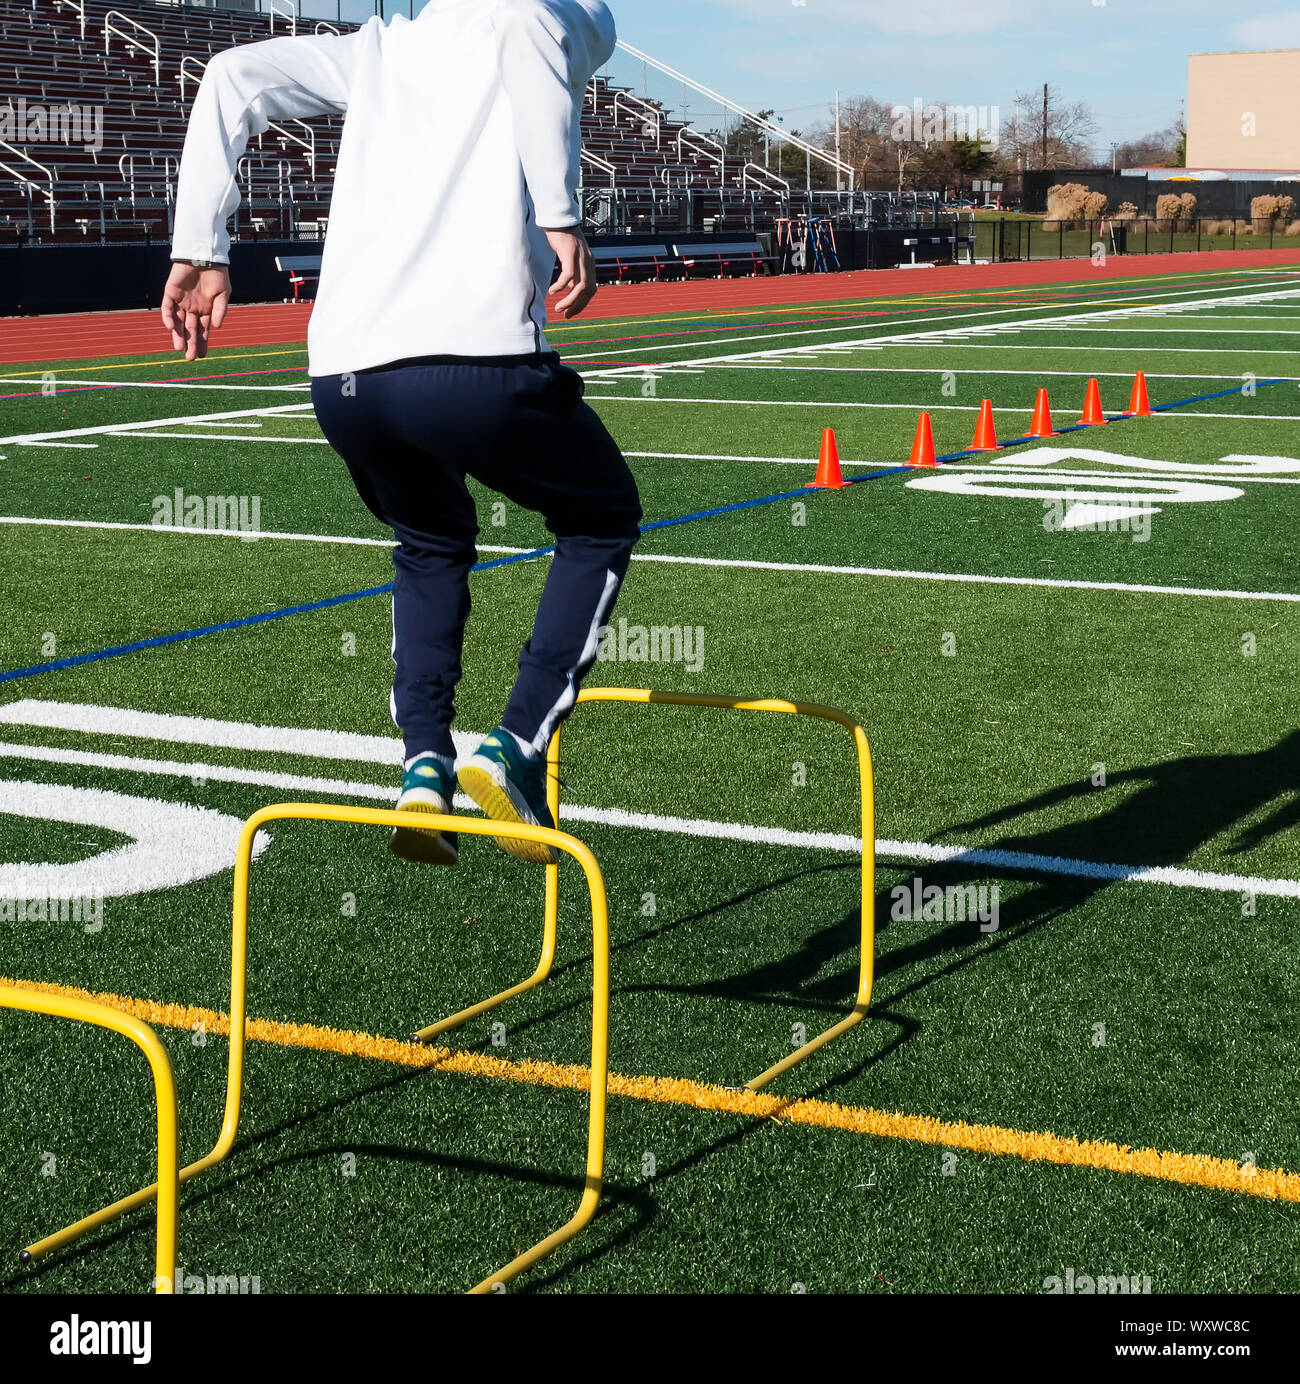 A high school track and field runner is jumping over hurdles during jumps practice on a turf field. Stock Photo